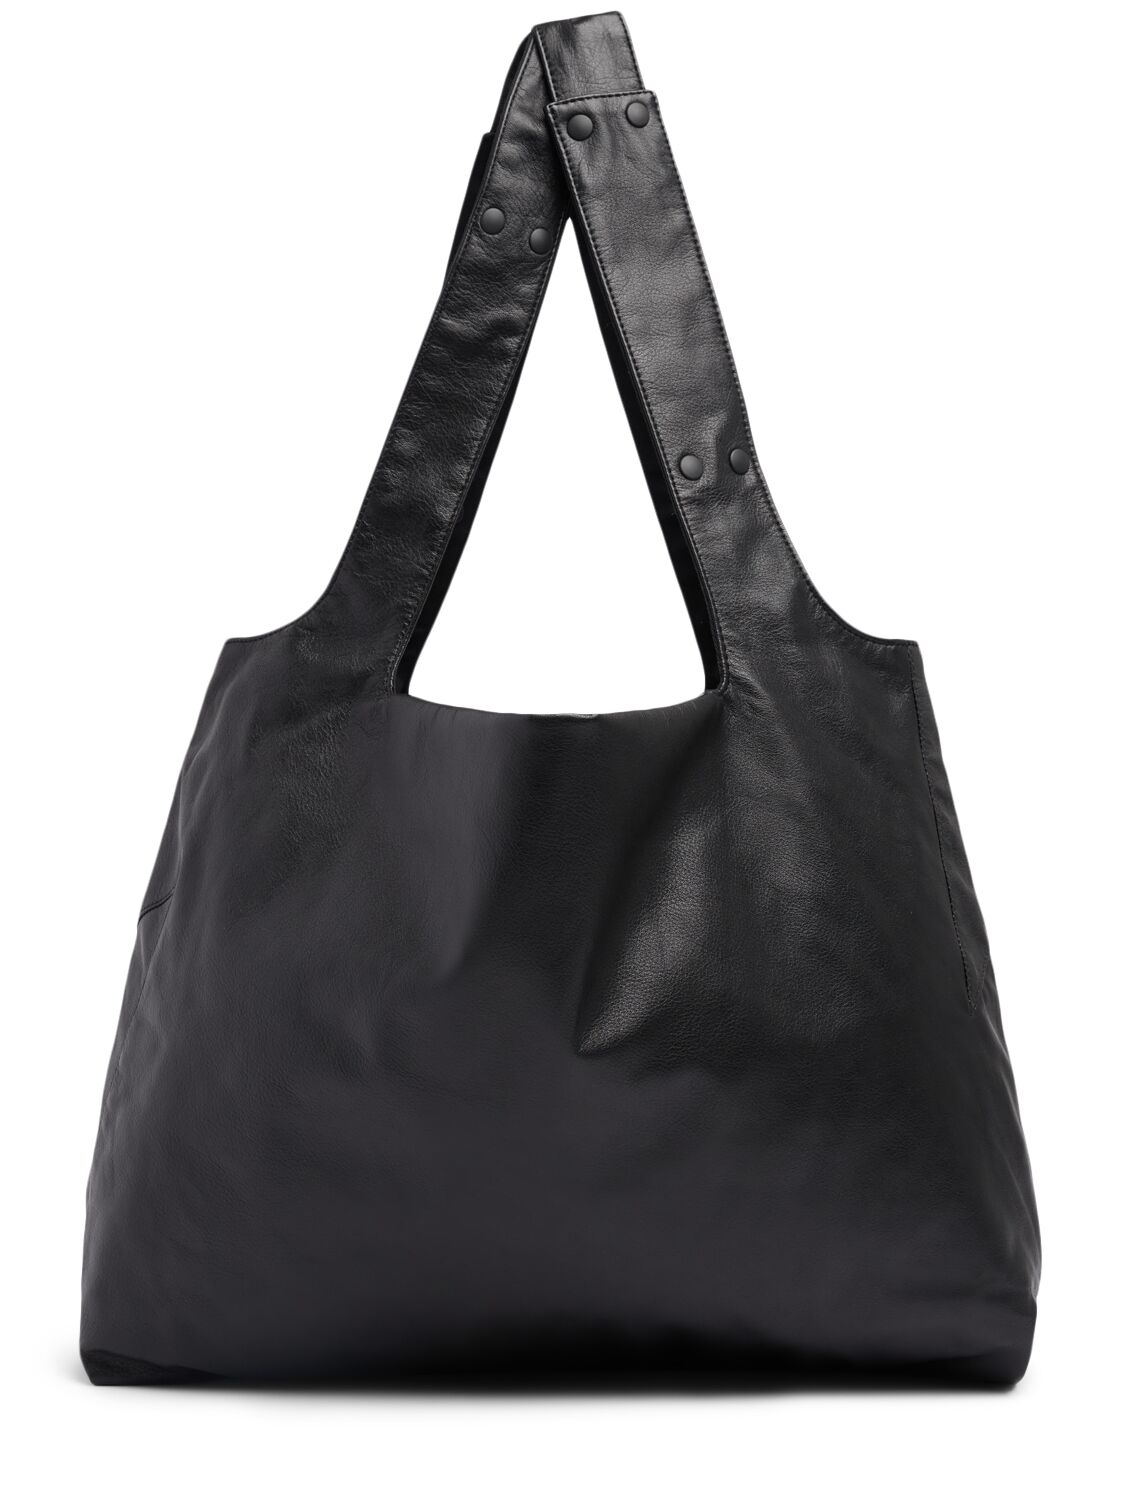 Image of Reversible Leather Tote Bag